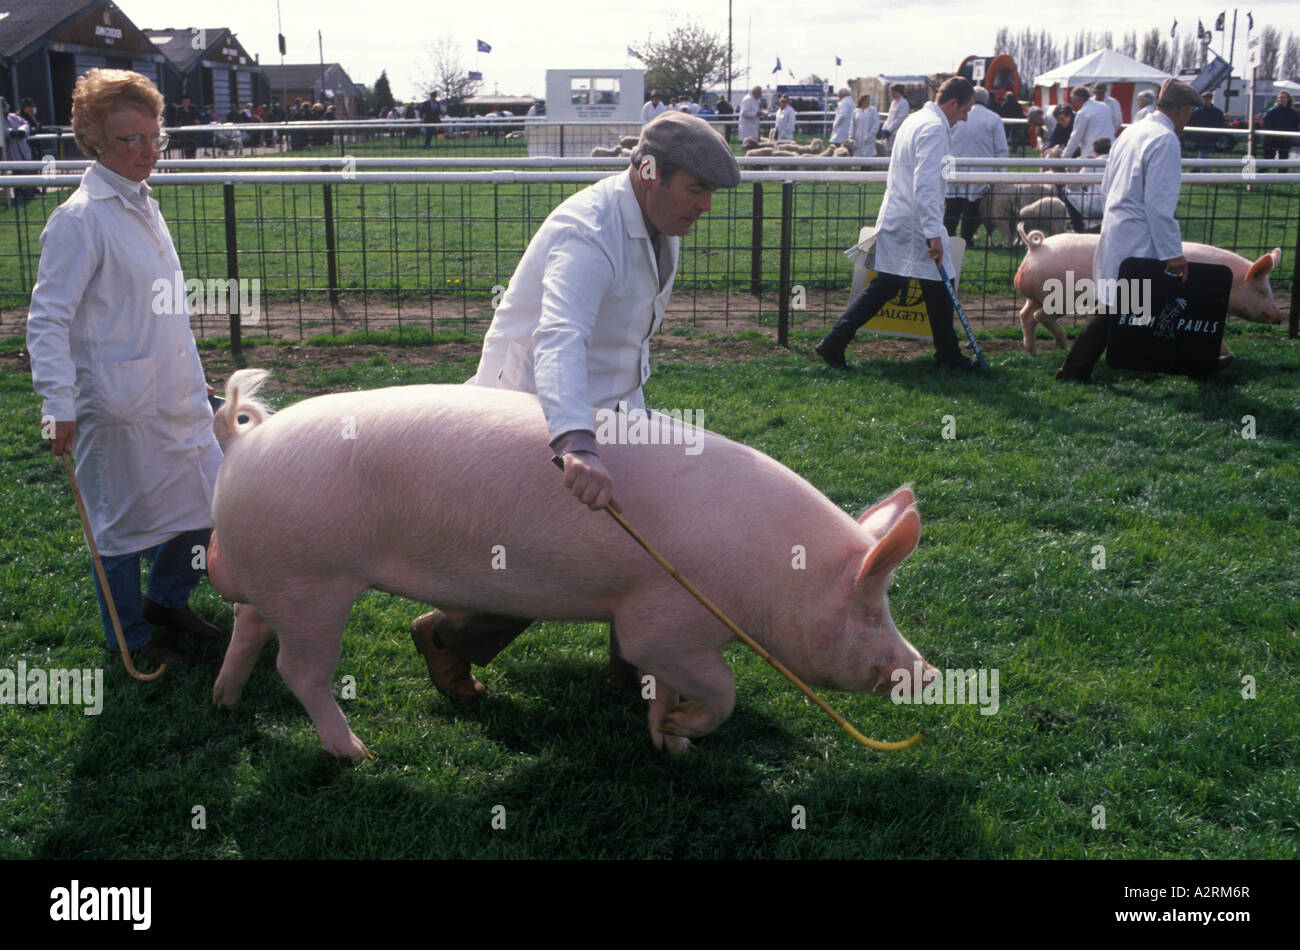 County Show 1990s UK. Pigs to competition. Nottingham County Show Newark Nottinghamshire England 90s  HOMER SYKES Stock Photo